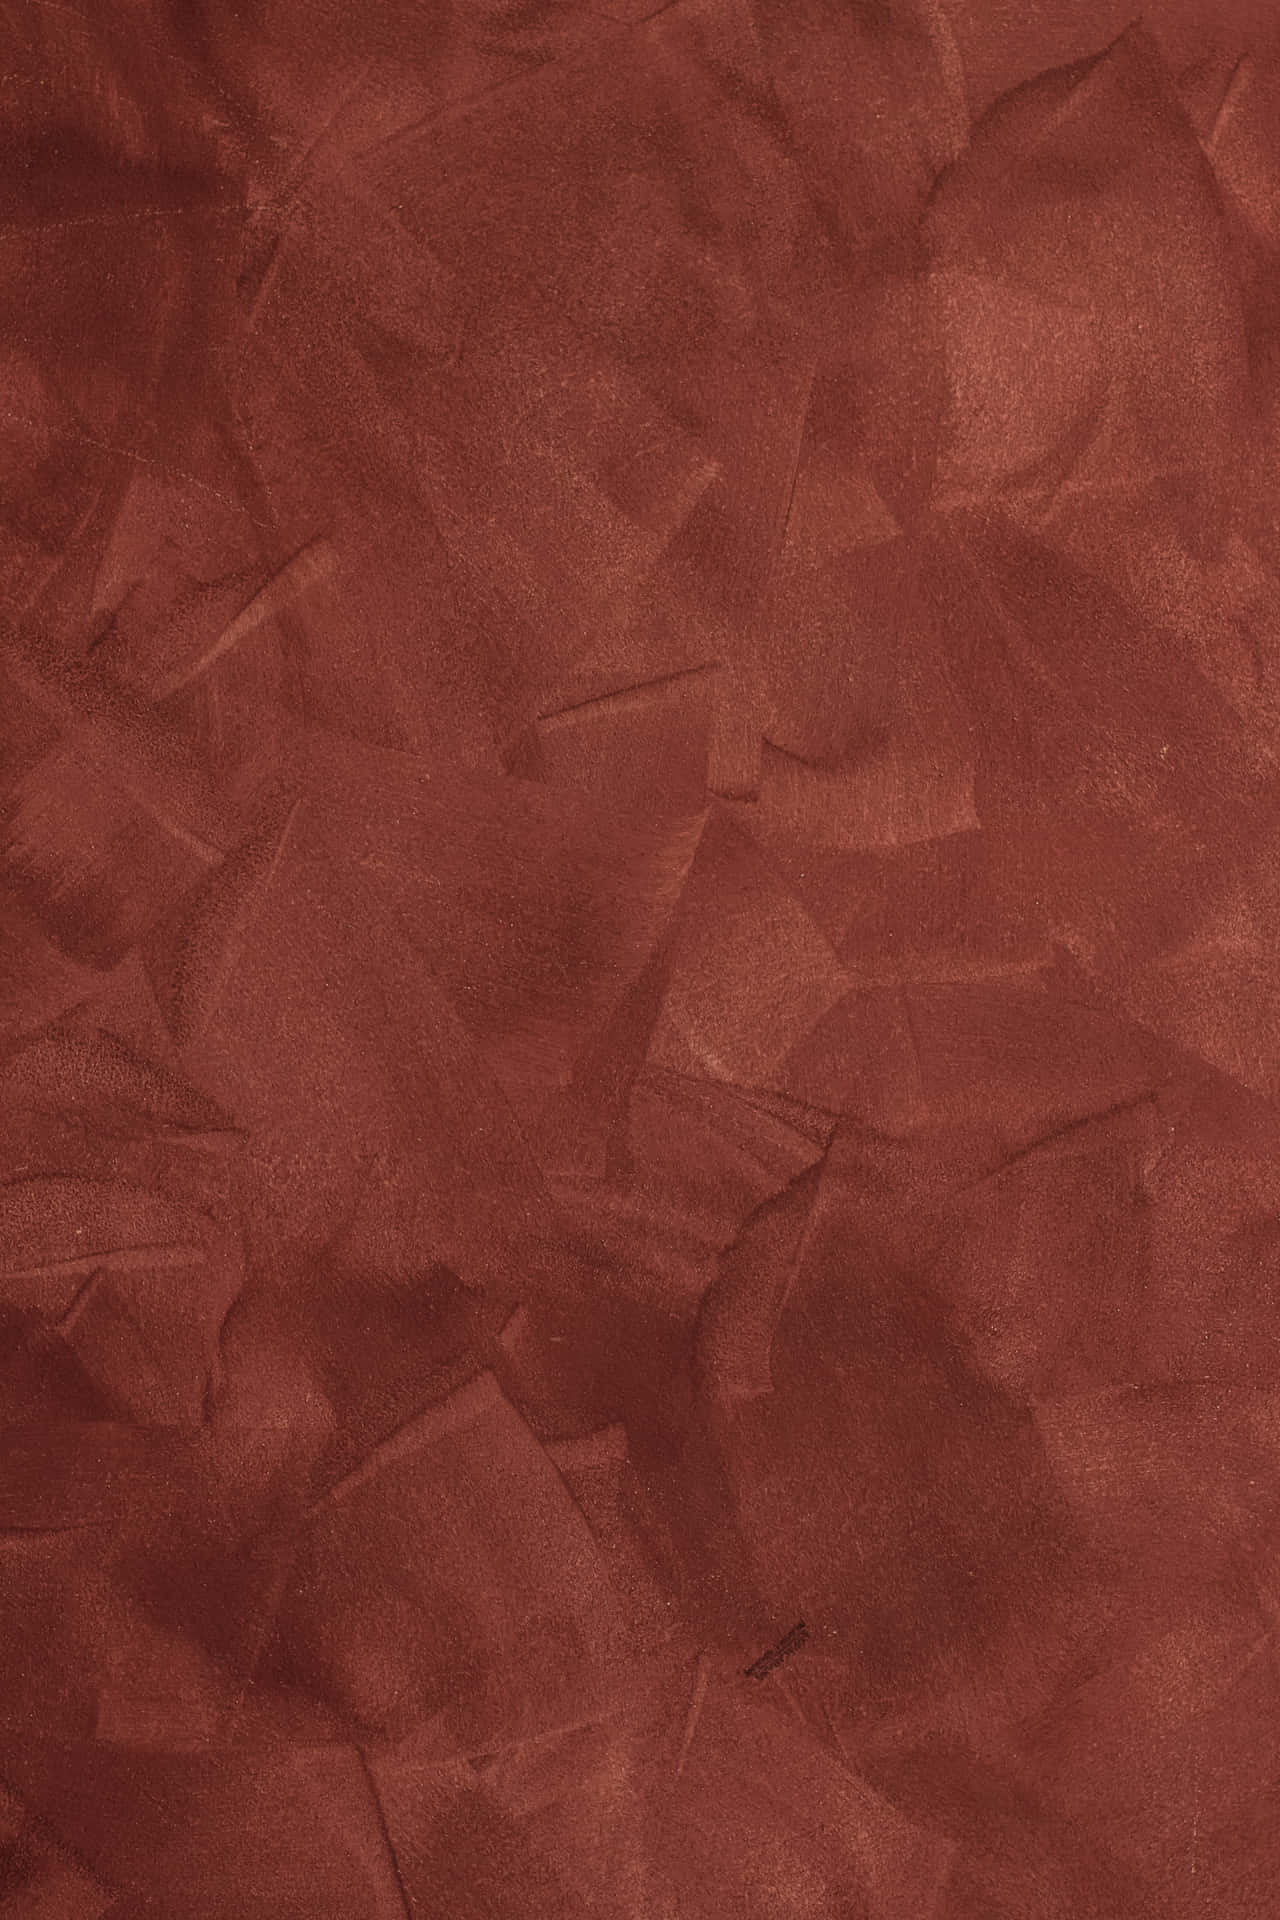 Maroon Paper With Patchy Strokes Background